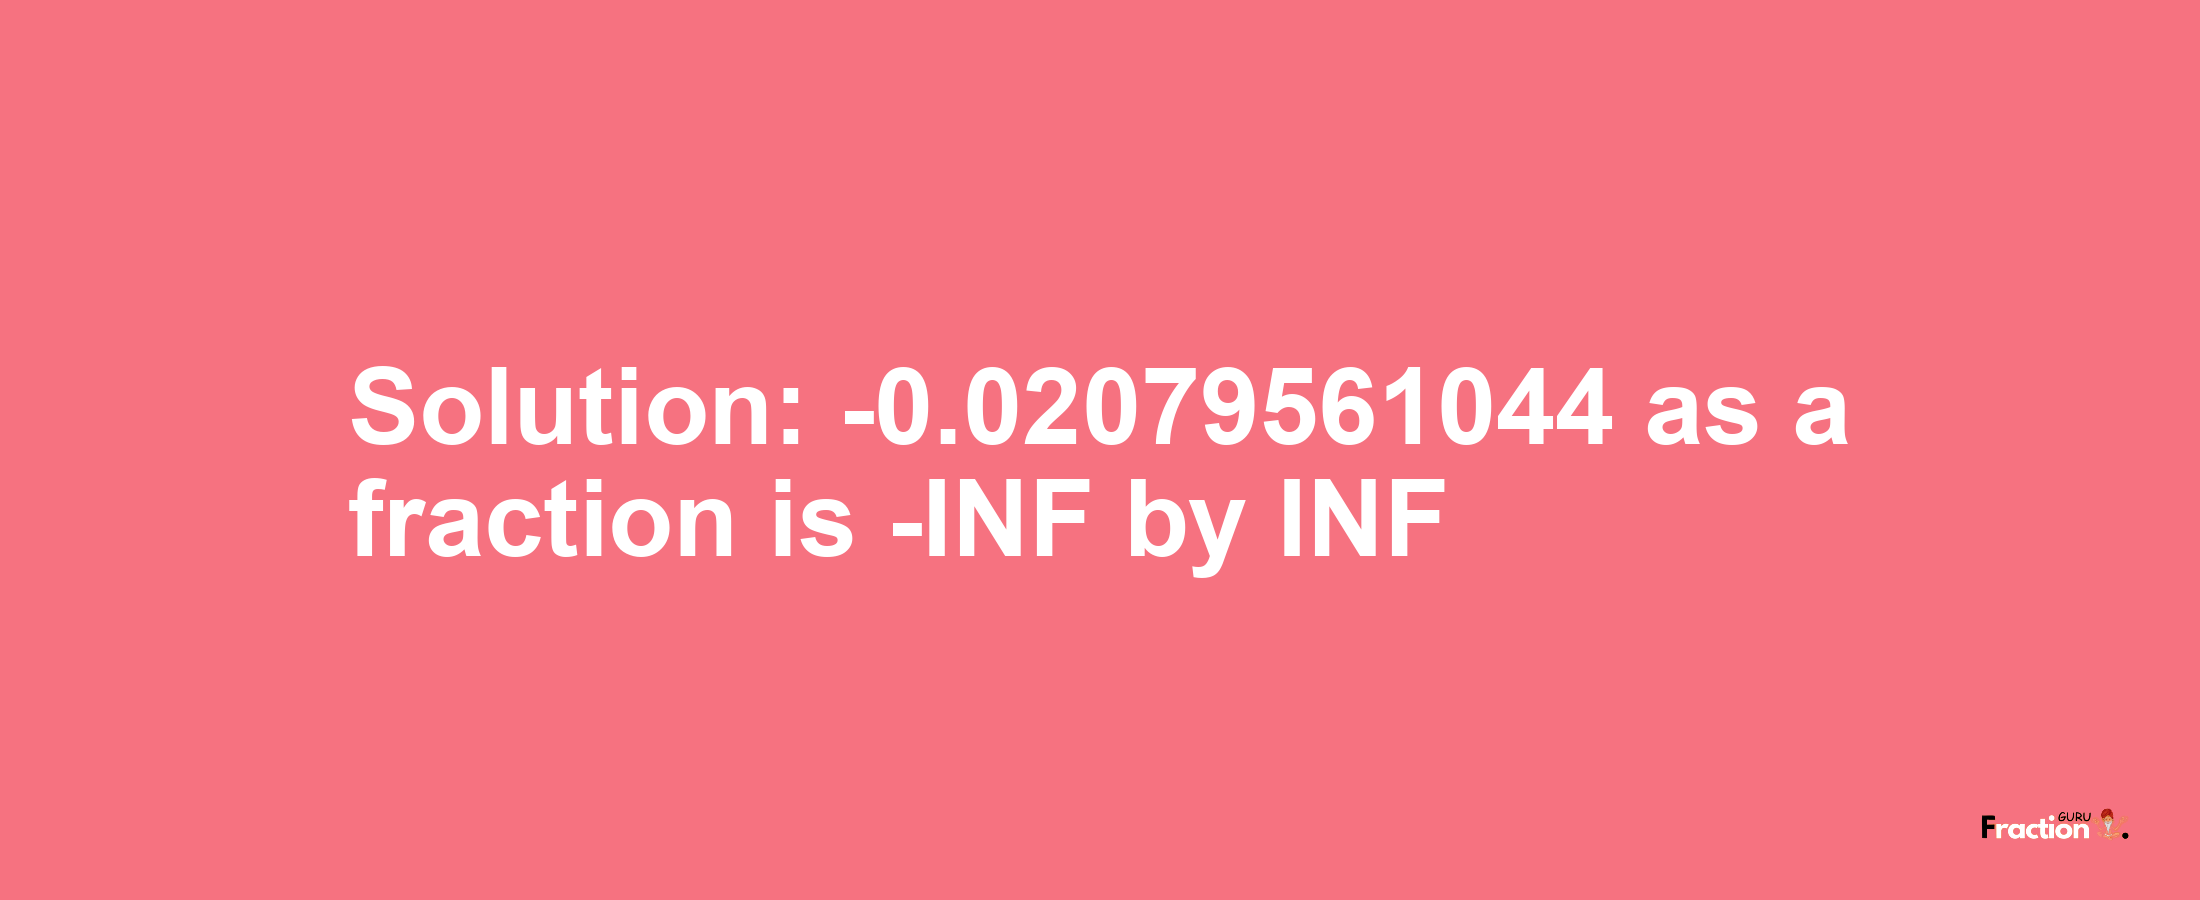 Solution:-0.02079561044 as a fraction is -INF/INF